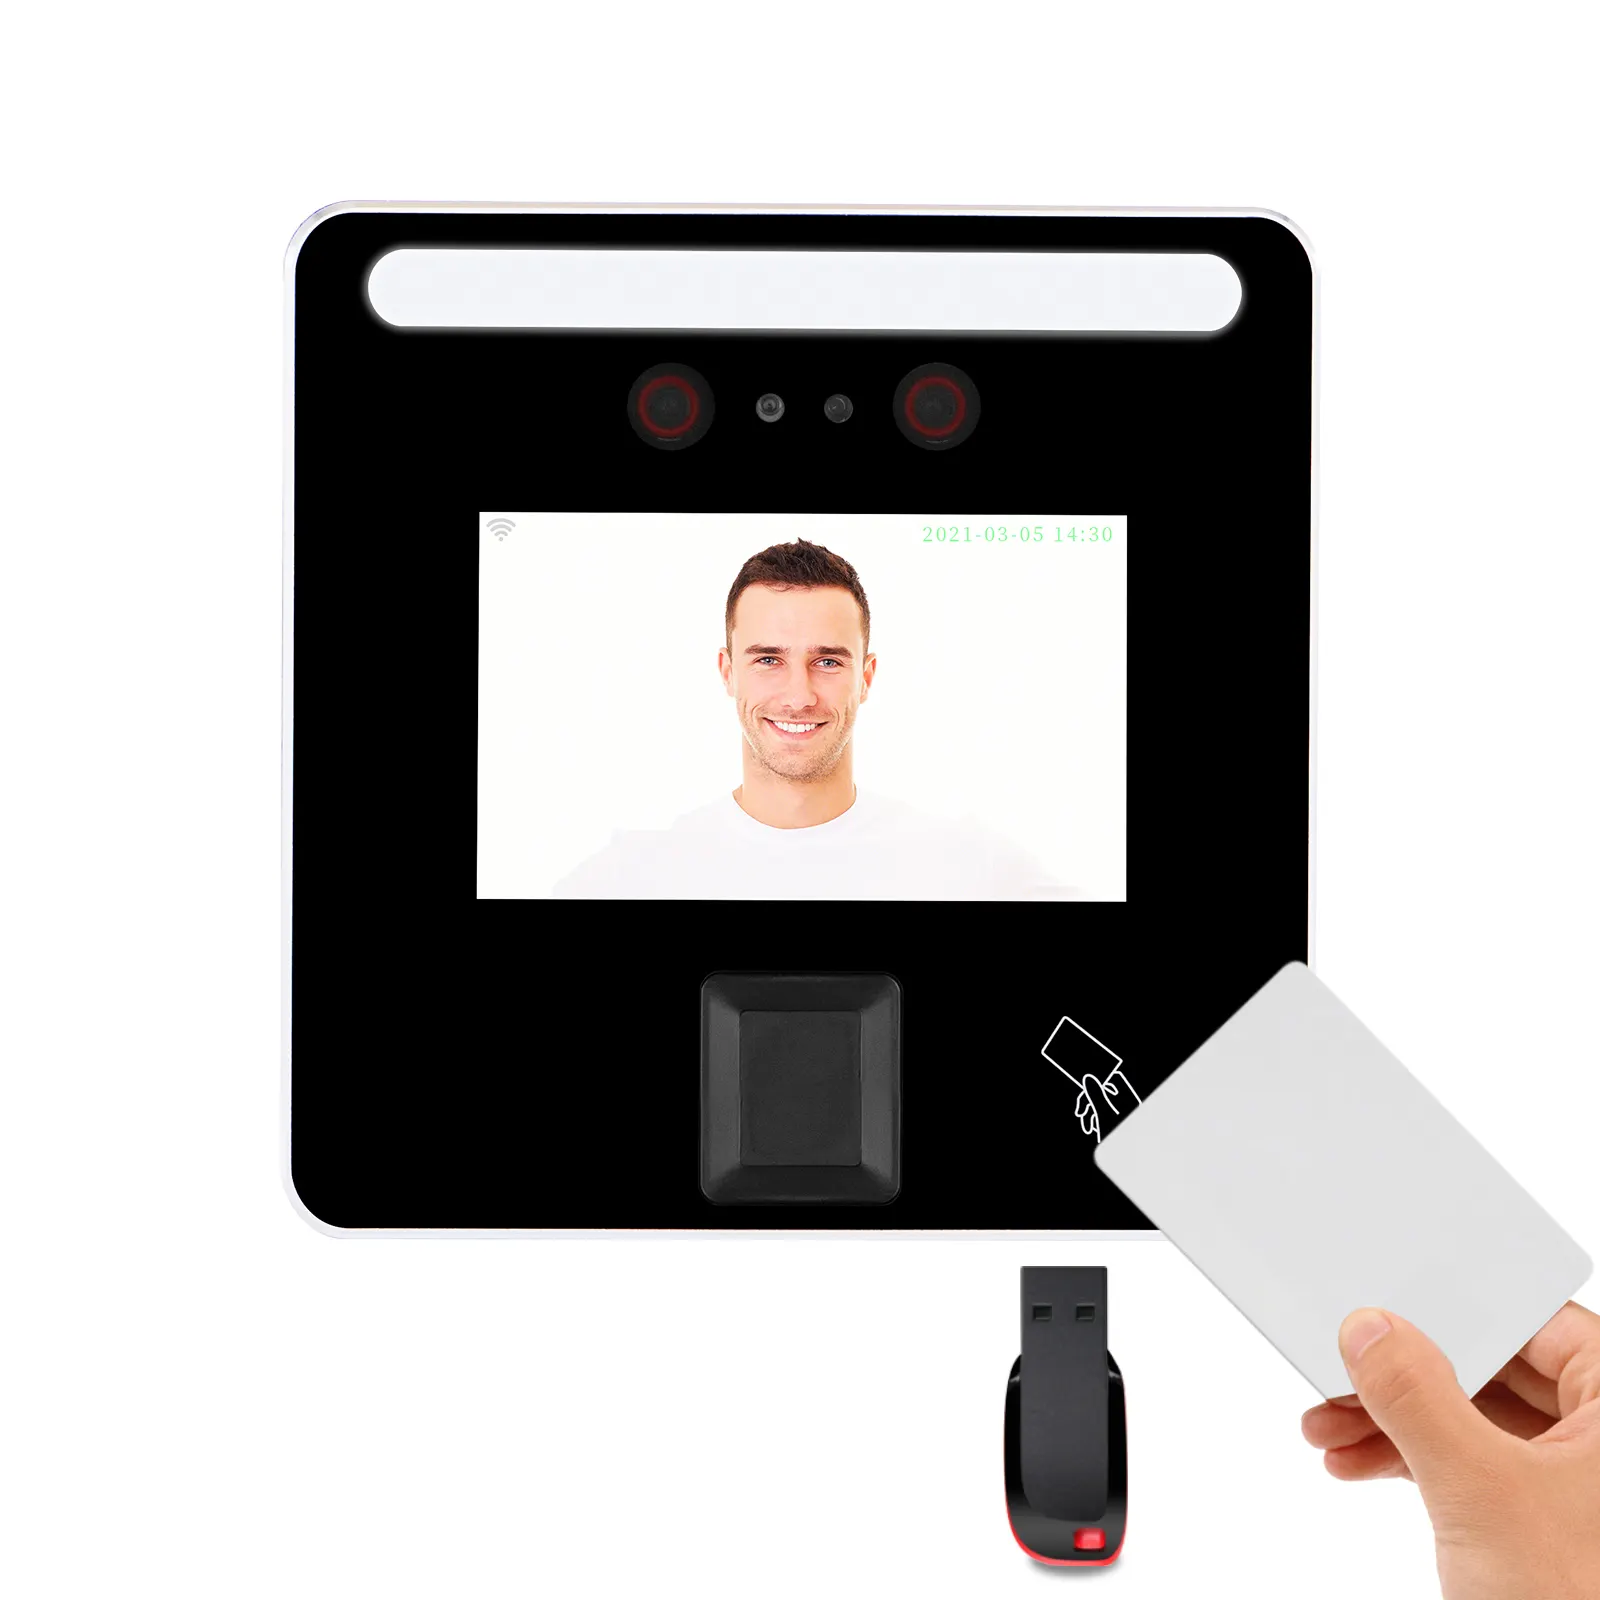 Hysoon VQ4 Access Control WIFI Fingerprint Face Time Attendance Machine With RFID Card Reader SDK Free Software Multi-language